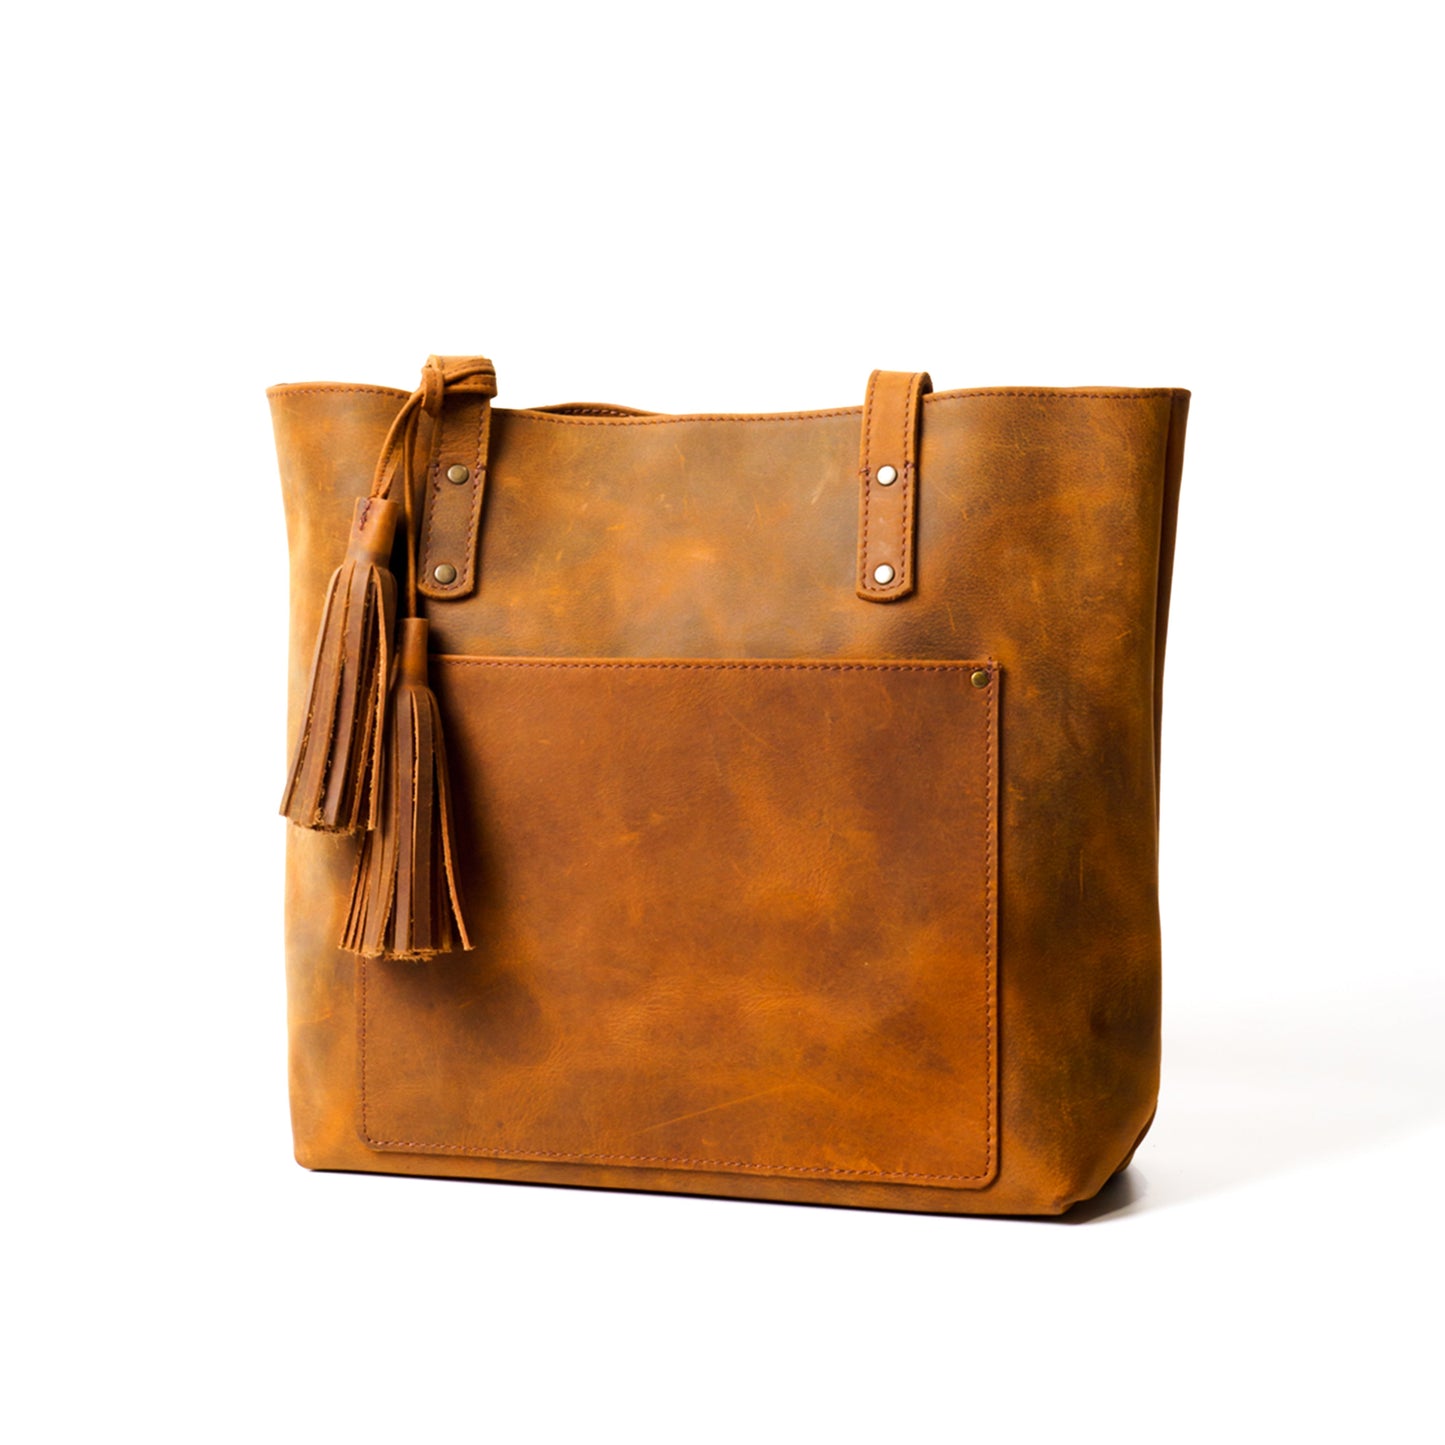 Leather Tote Bag for Women - Light Brown